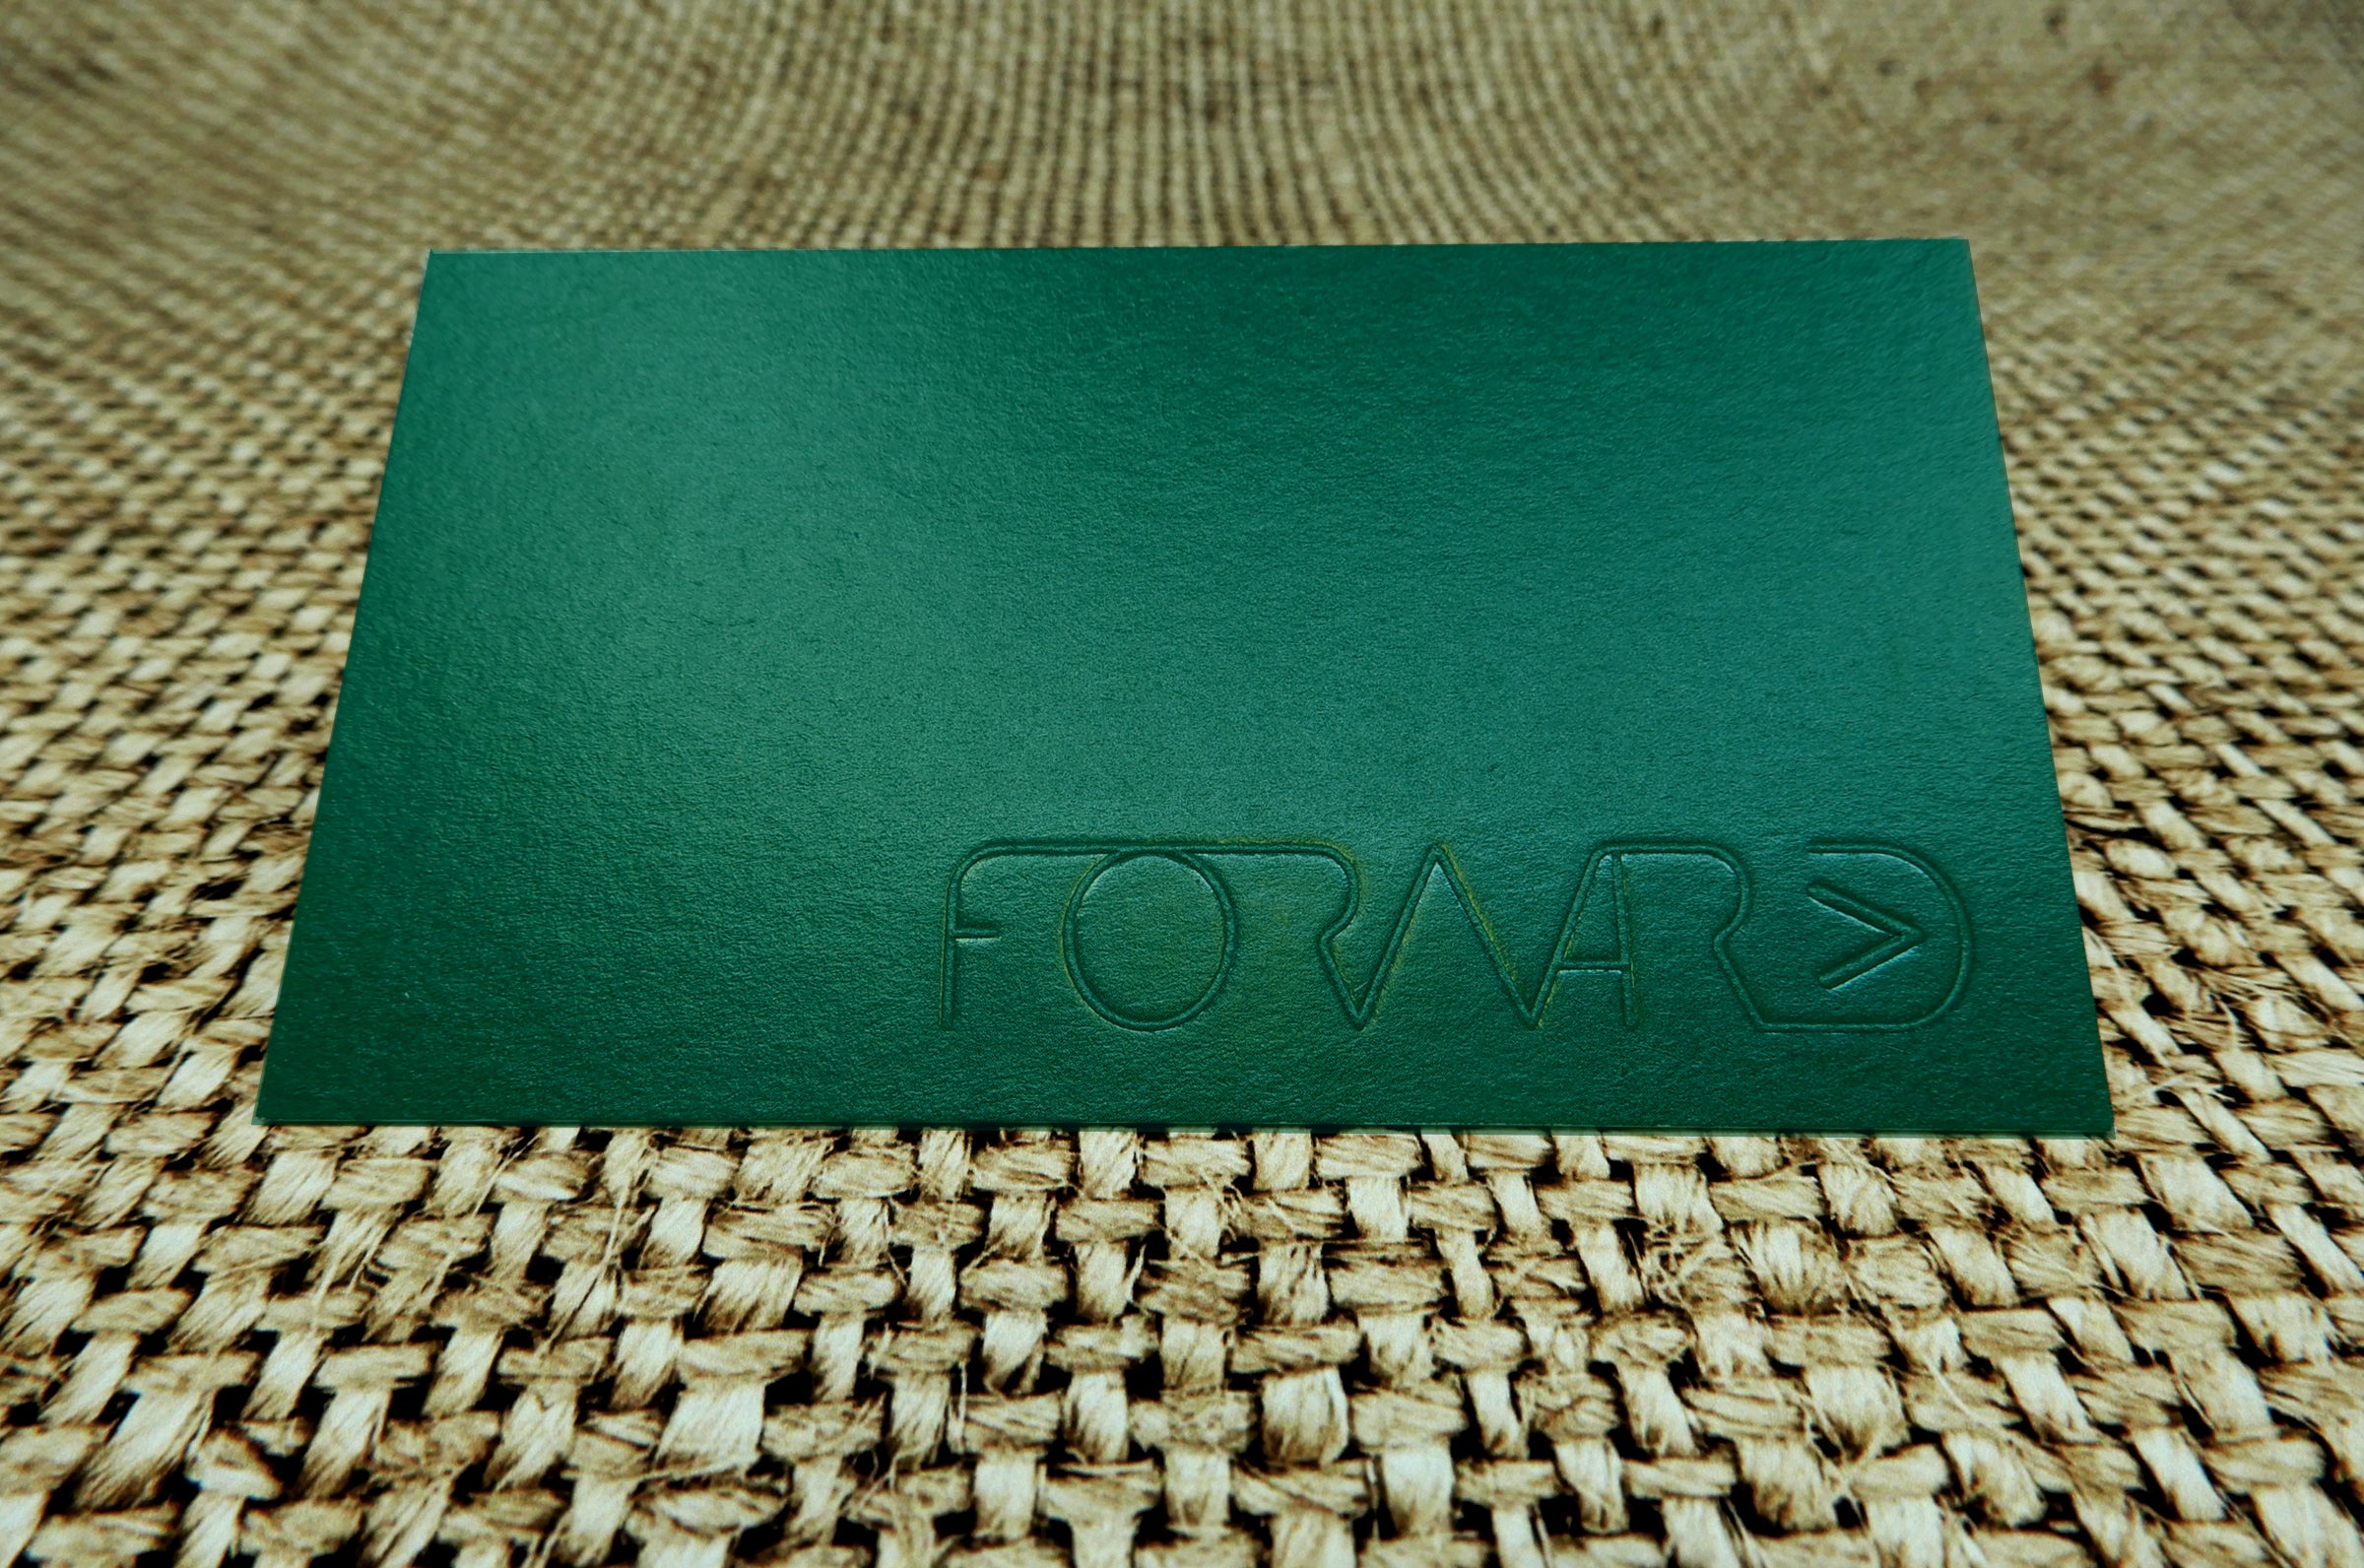 Custom business card for Forward with debossing | deep green color with forward logo debossed in the bottom right corner | Clubcard Printing USA